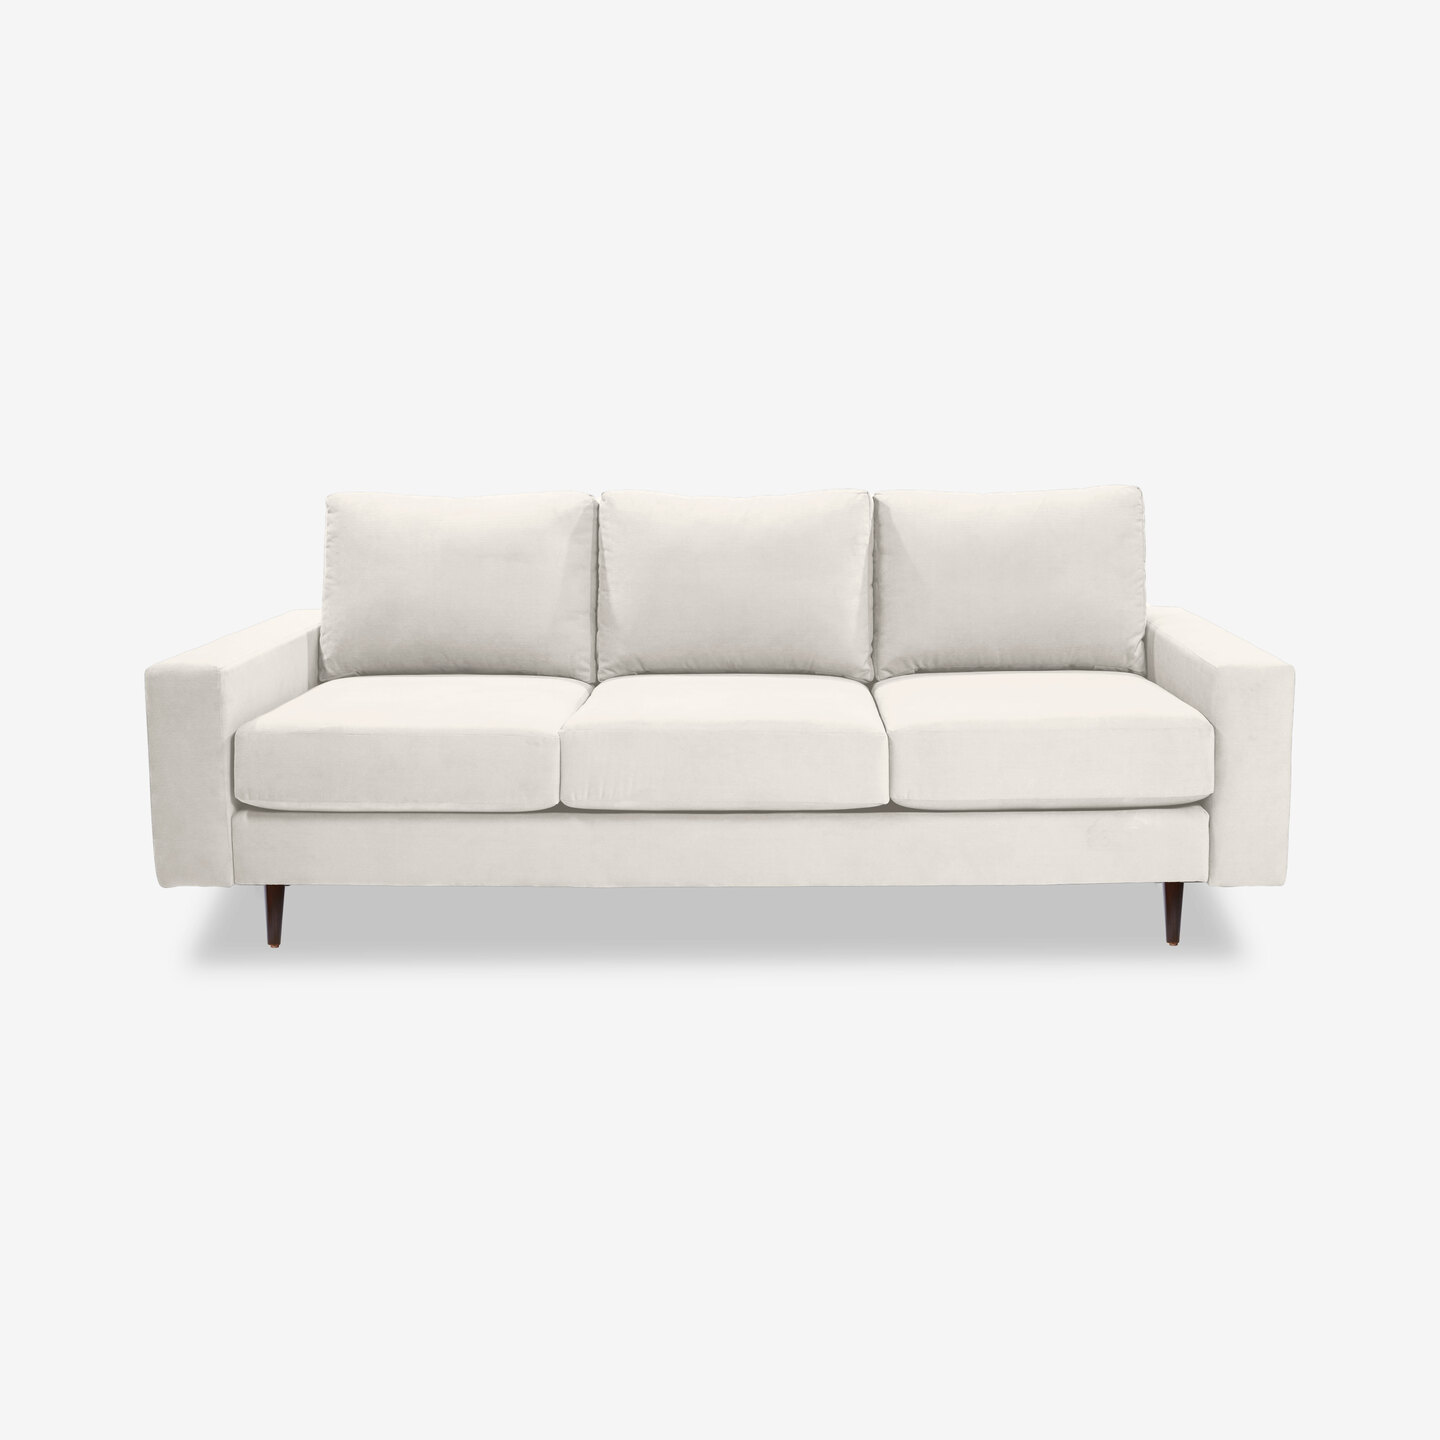 1373_Brooks-Sofa-Wide-Arm-White_Front_2021